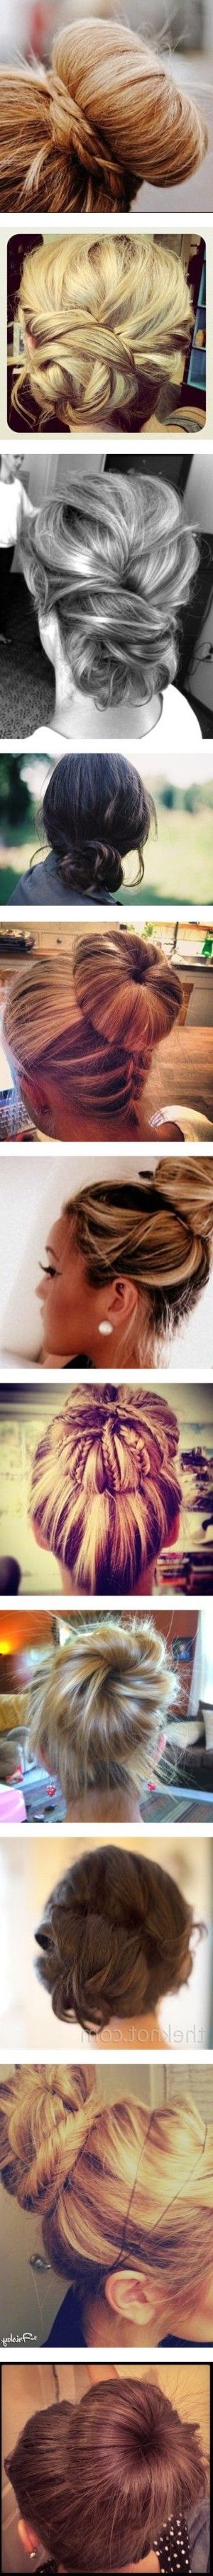 Favorite Funky Sock Bun Micro Braid Hairstyles Within We Can't Resist Buns As Our Go To Hairstyle For All (View 11 of 20)